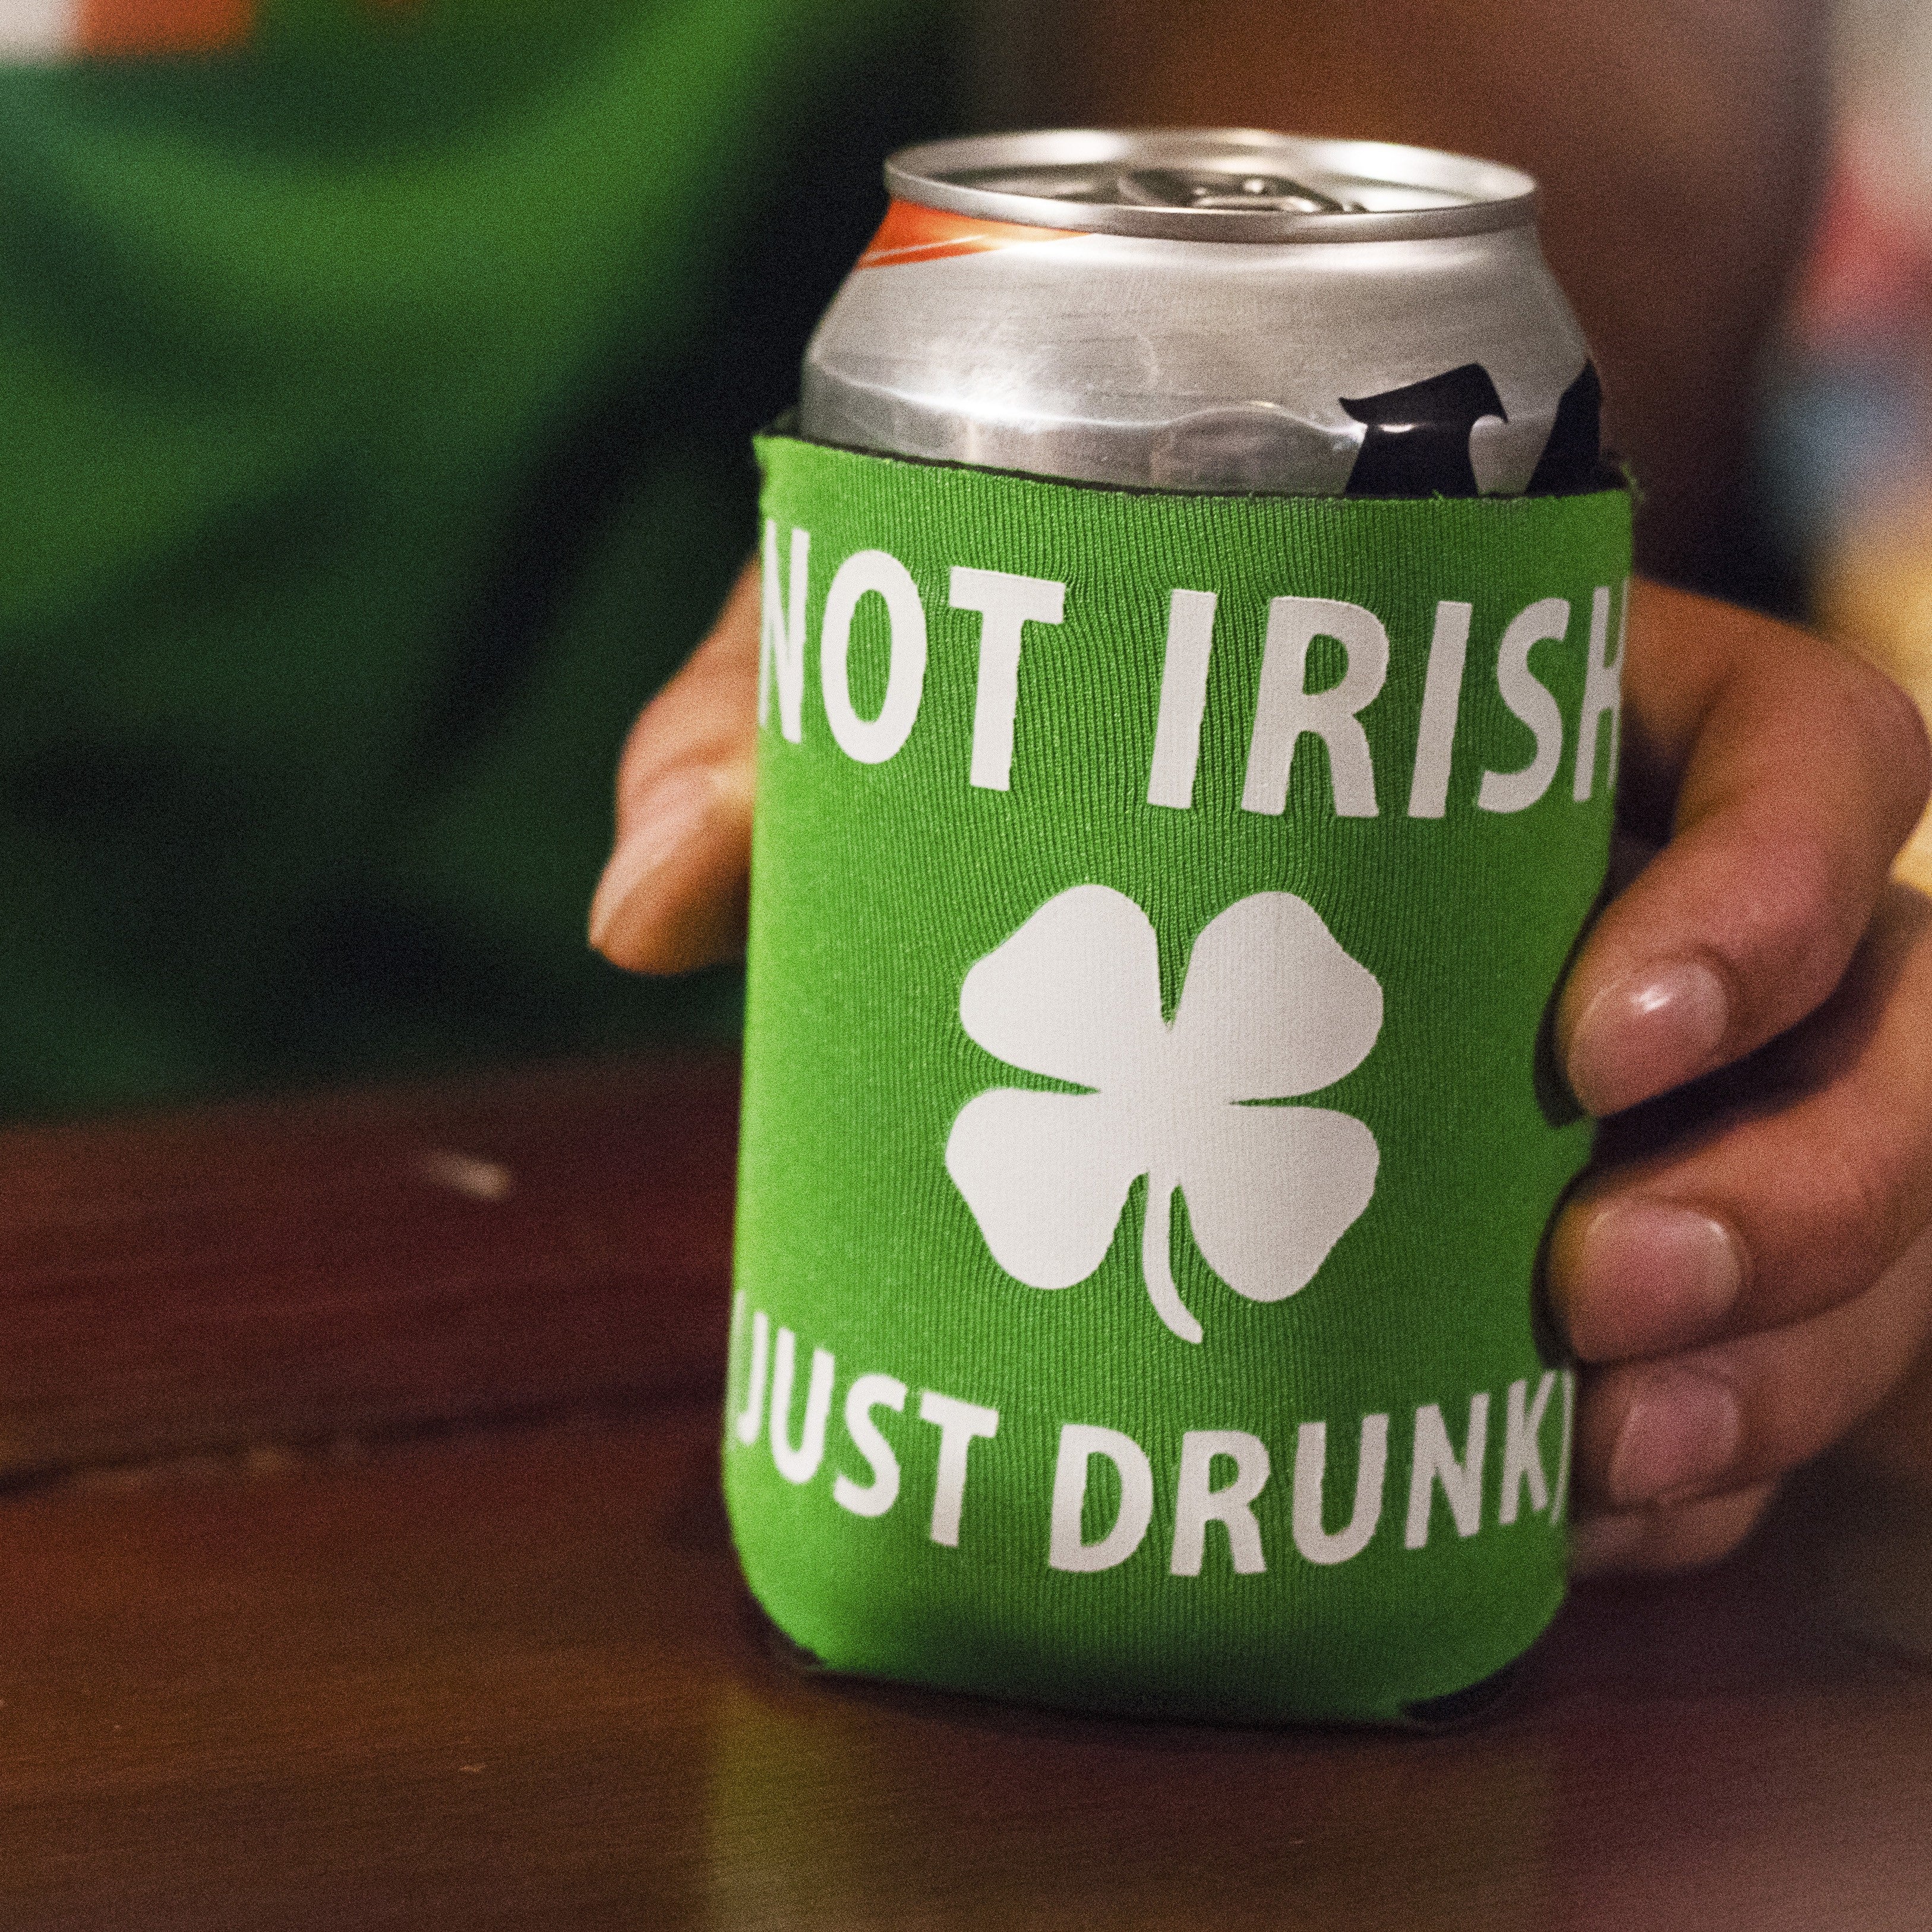 Not Irish, Just Drunk (Green) / Can Cooler - Route One Apparel